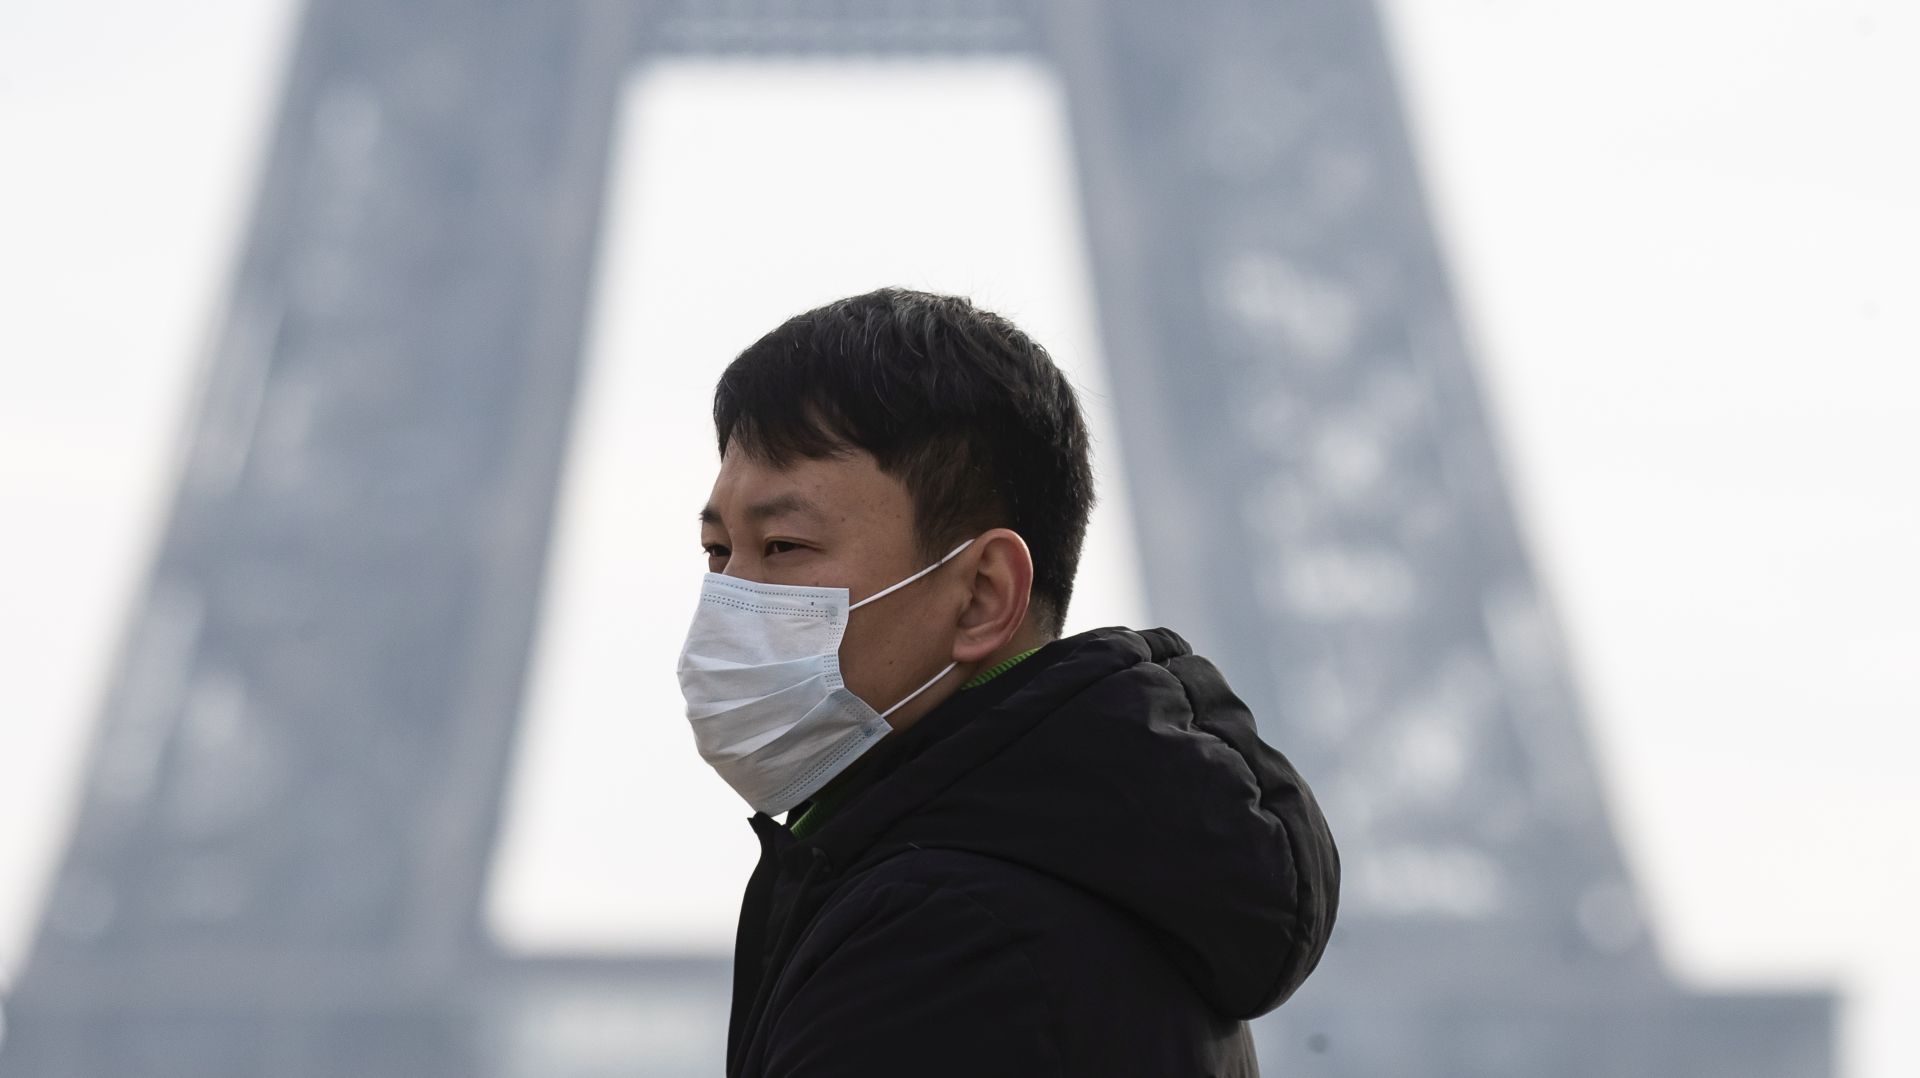 epa08219872 (FILE) - A tourist wears a face mask near the Eiffel Tower in Paris, France, 25 January 2020 (reissued 15 February 2020). The French Ministry of Health announced on 15 February that an 80-year-old Chinese tourist from Hubei province, who was hospitalized in intensive care at Bichat hospital in Paris in late January, had died from the novel coronavirus, marking the first death outside Asia of the virus.  EPA/IAN LANGSDON